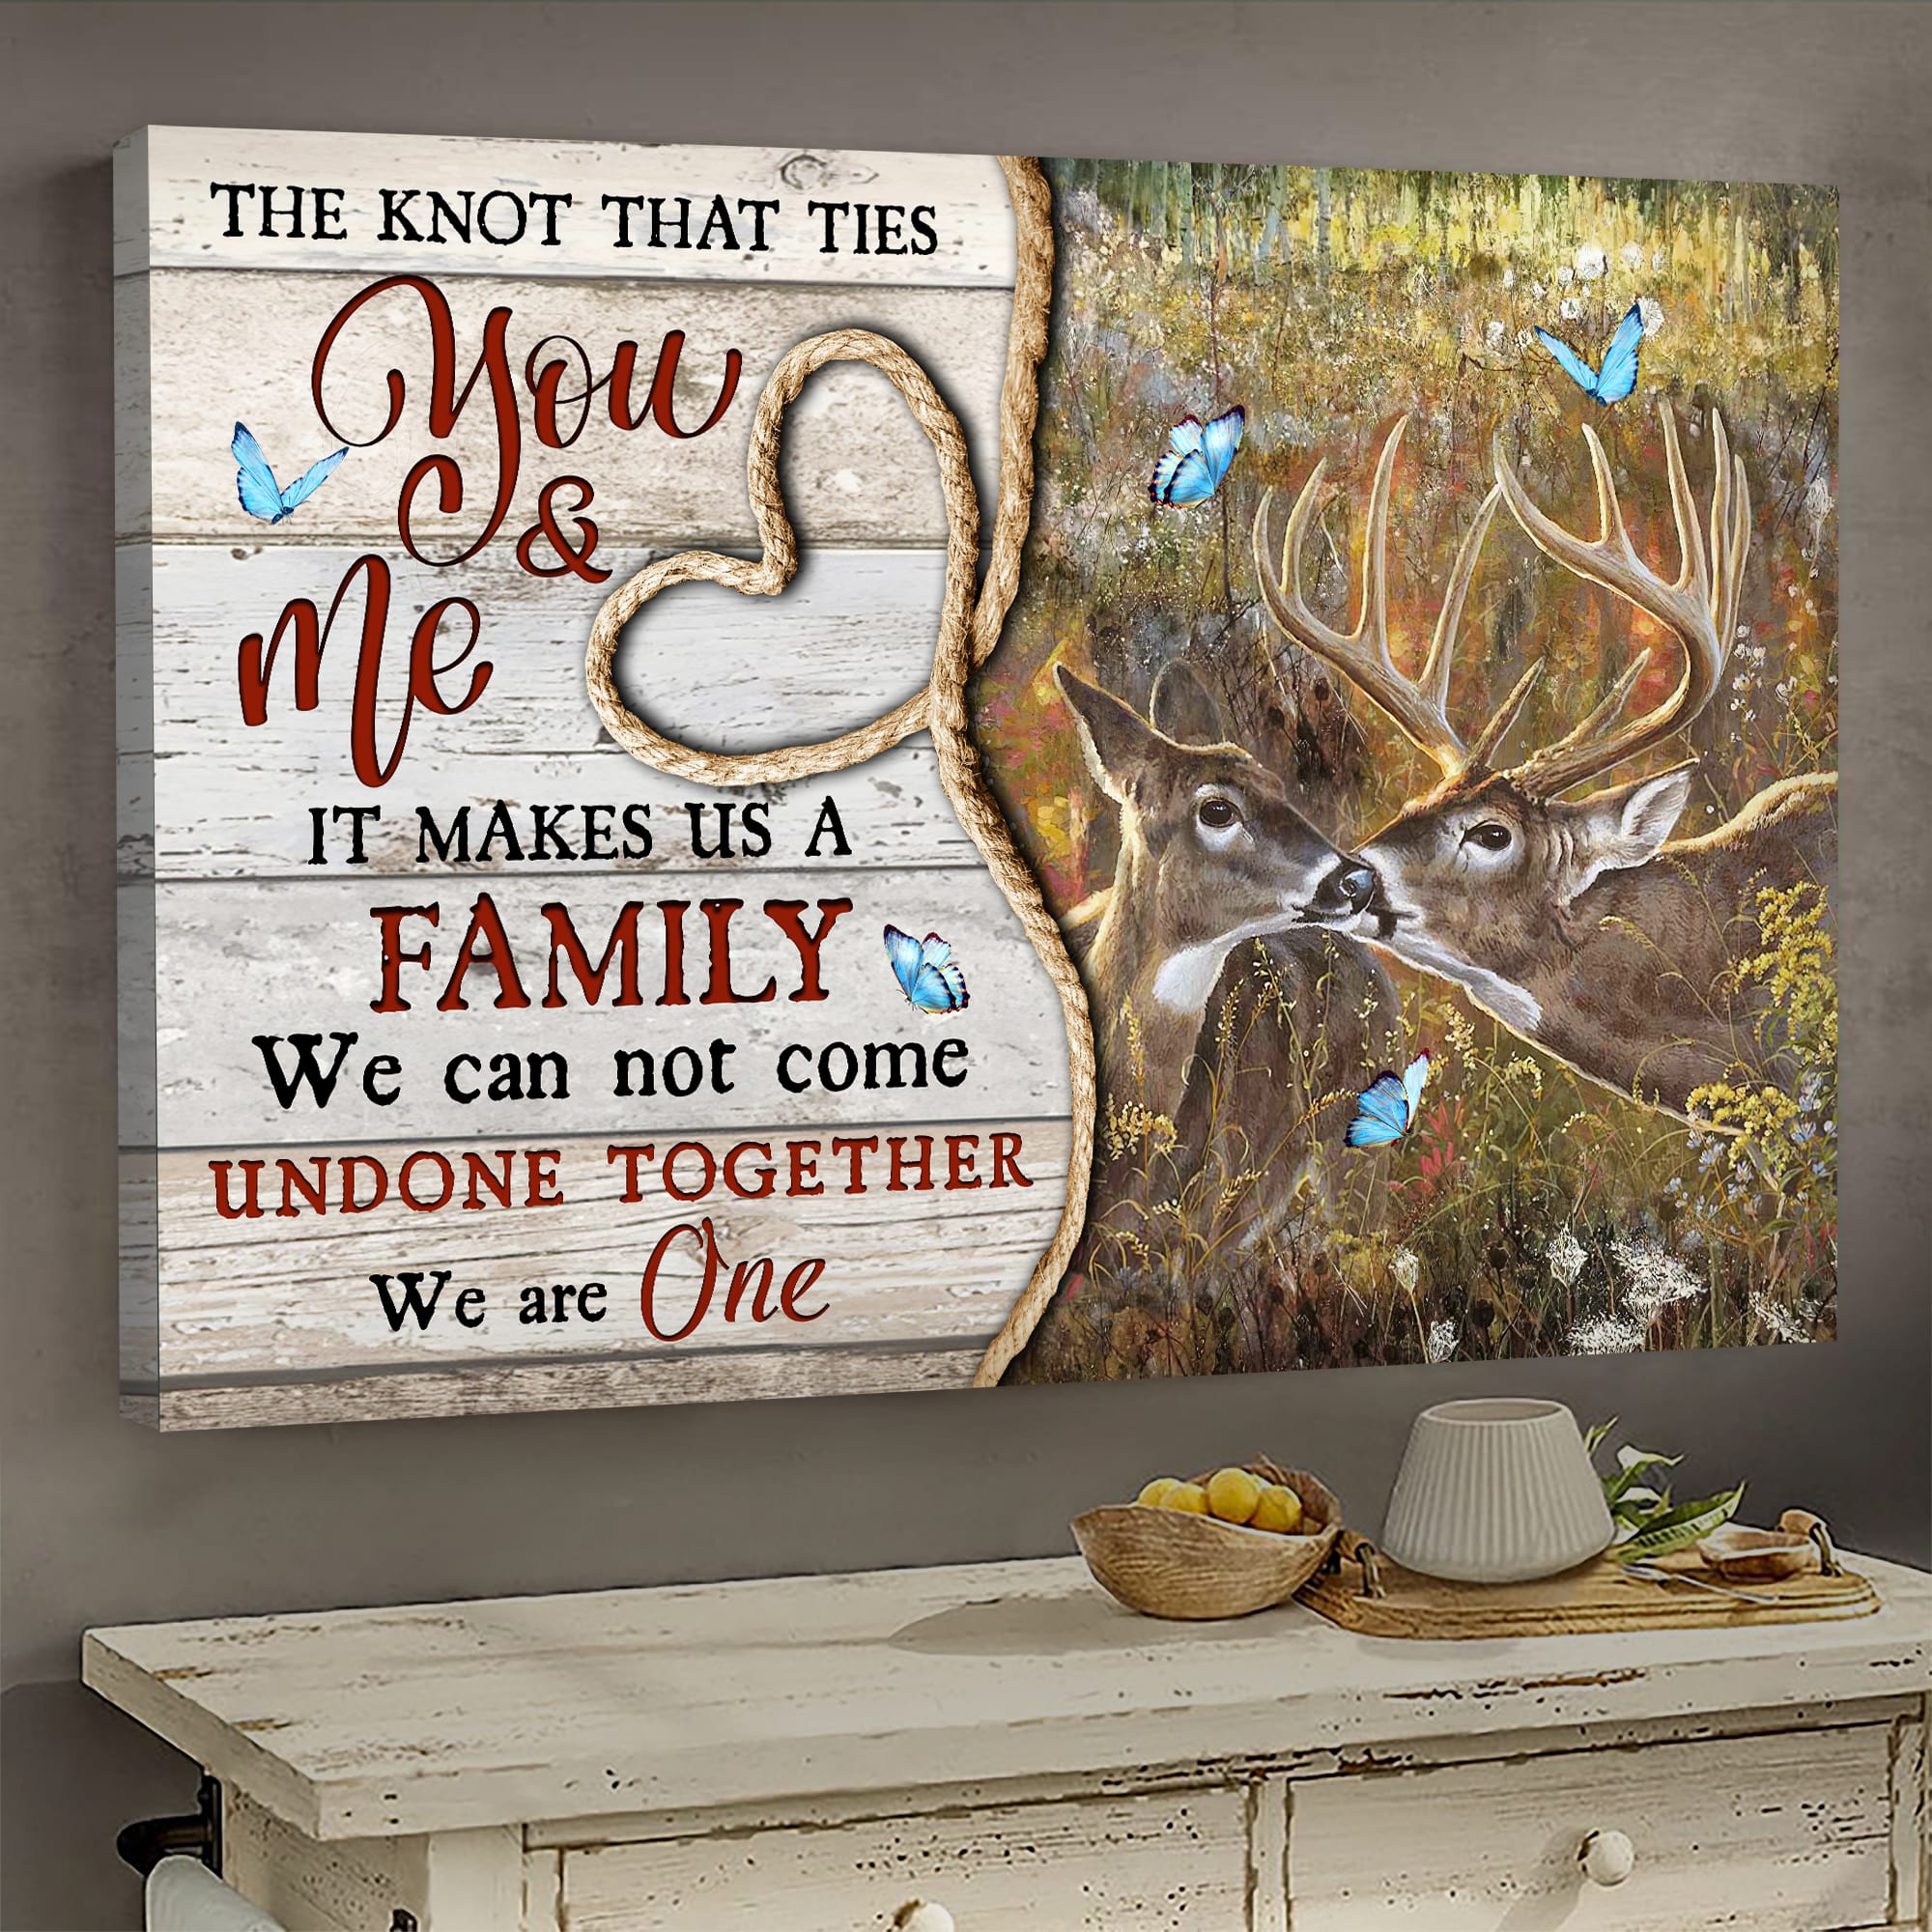 Couple, Marriage, Deer - The knot ties you & me makes us family Landscape Canvas Prints, Wall Art